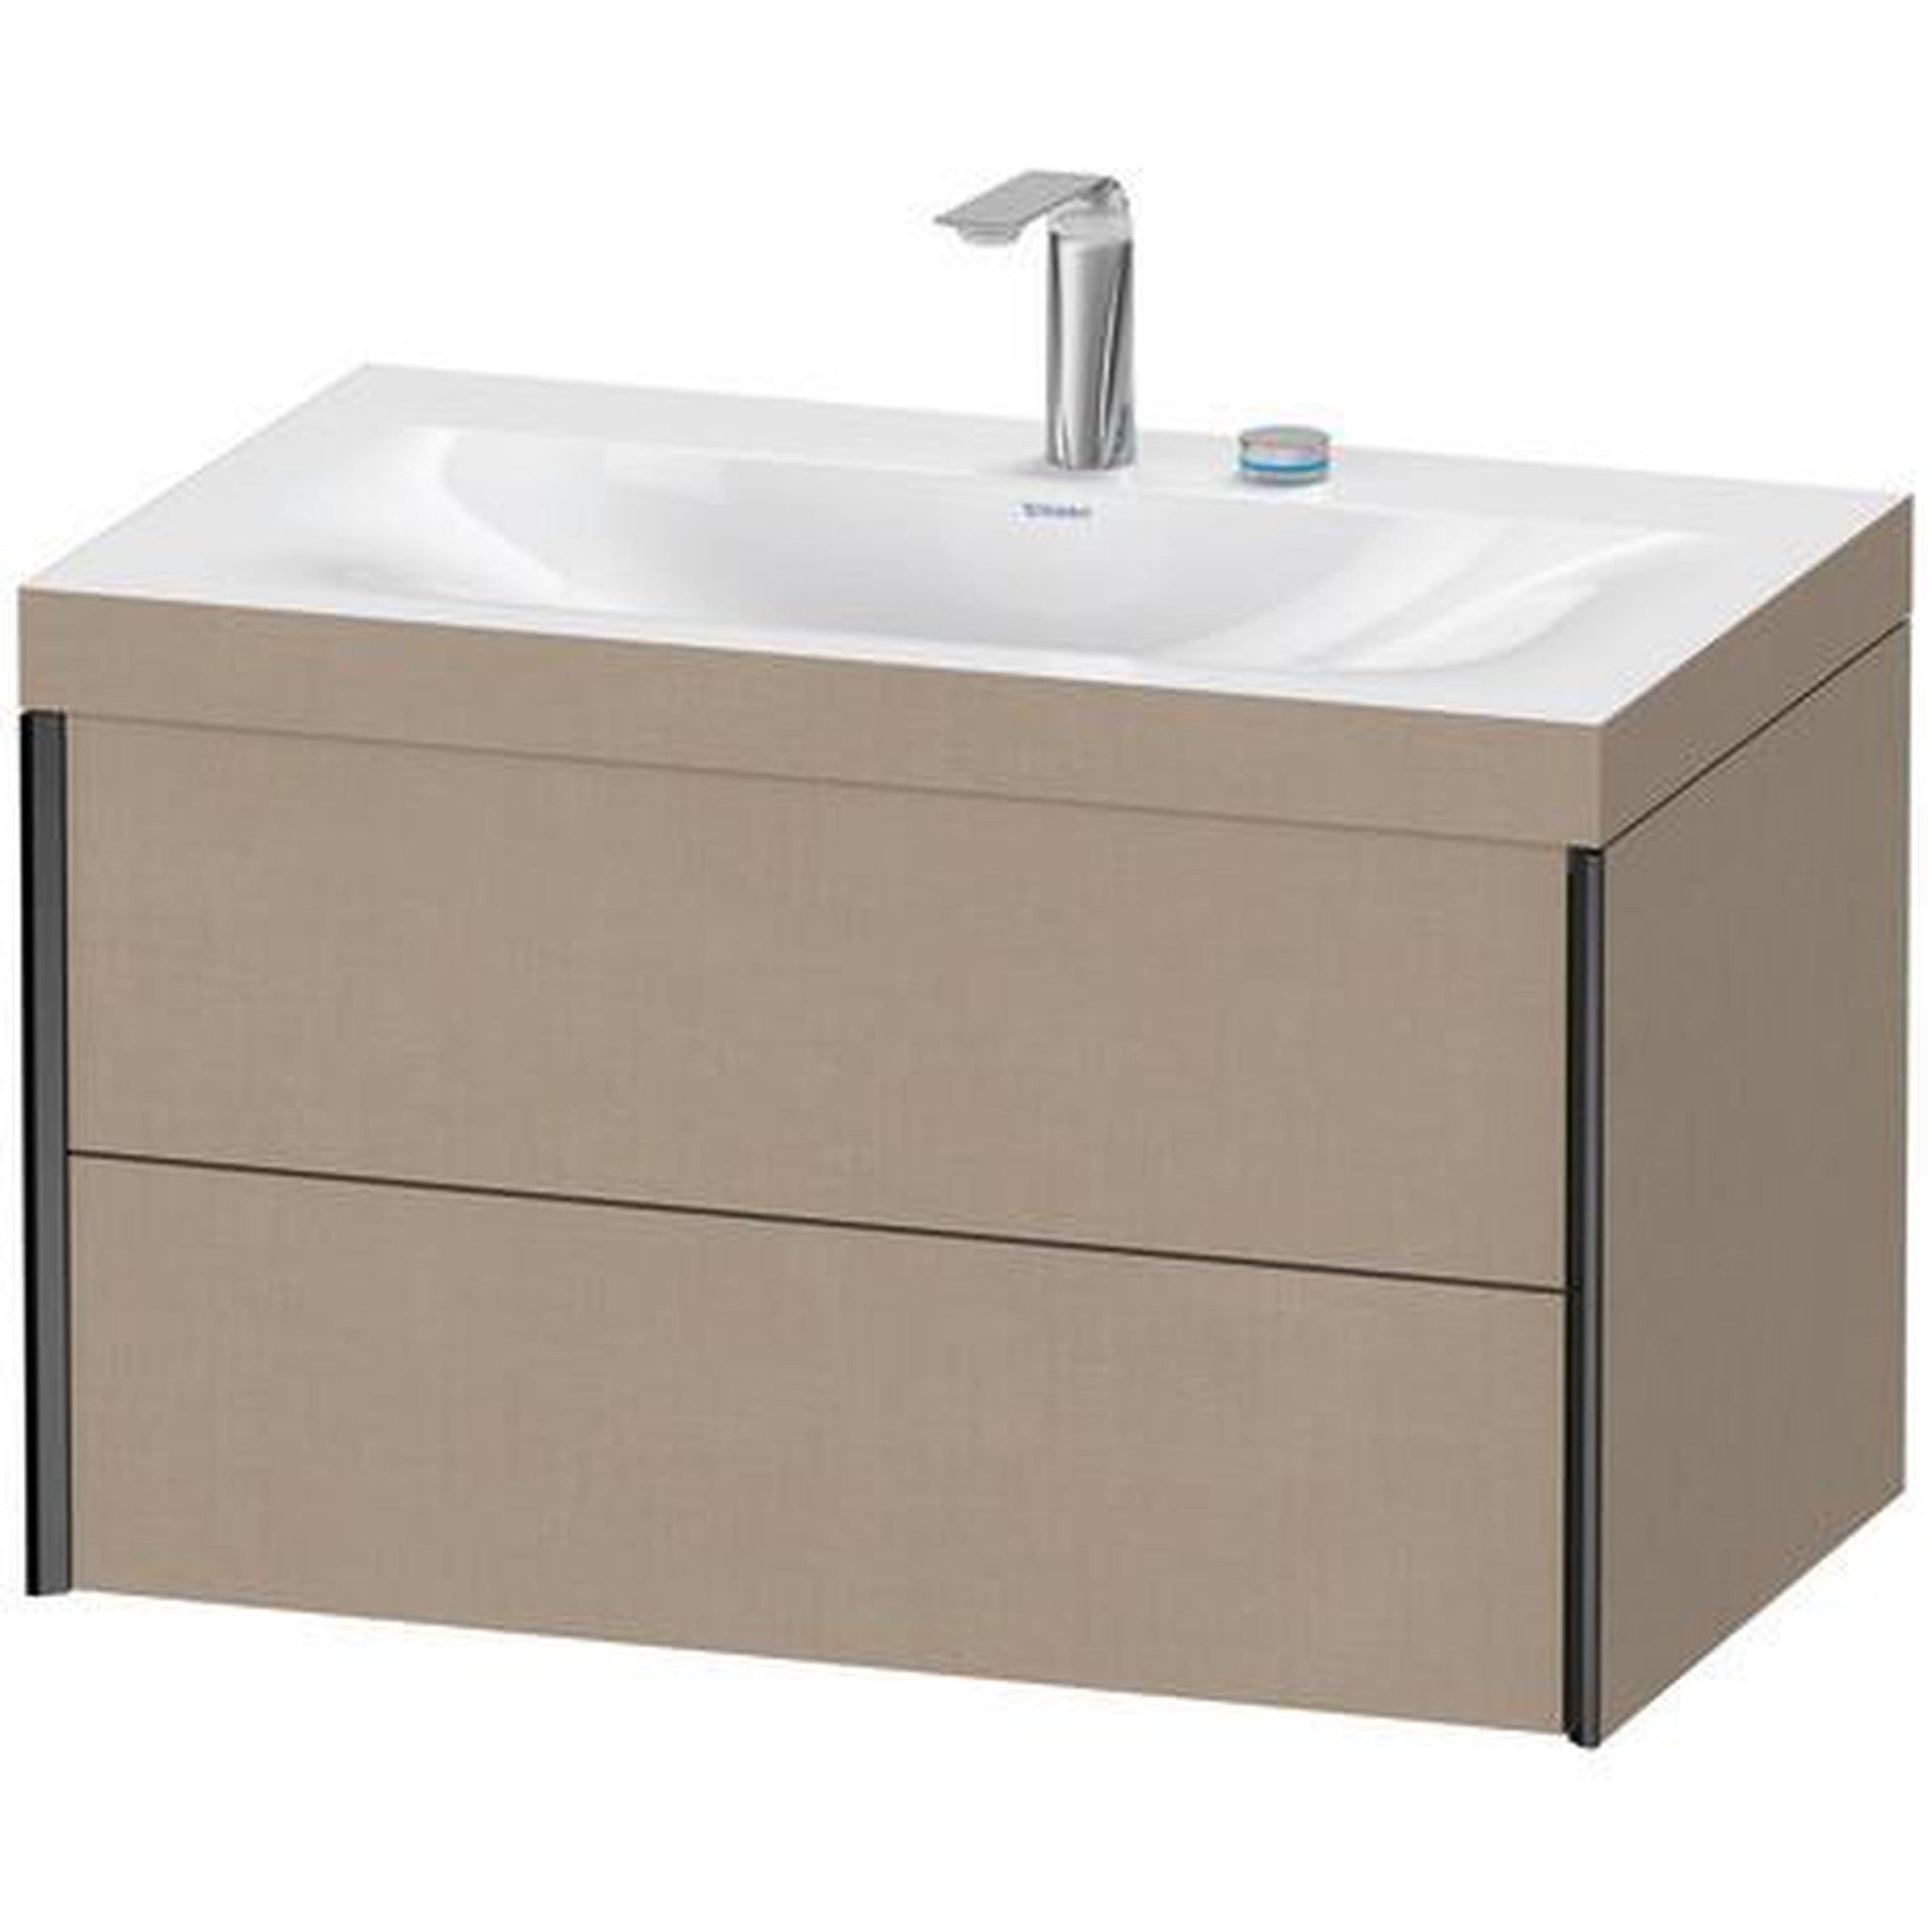 Duravit Xviu 31" x 20" x 19" Two Drawer C-Bonded Wall-Mount Vanity Kit With Two Tap Holes, Linen (XV4615EB275C)